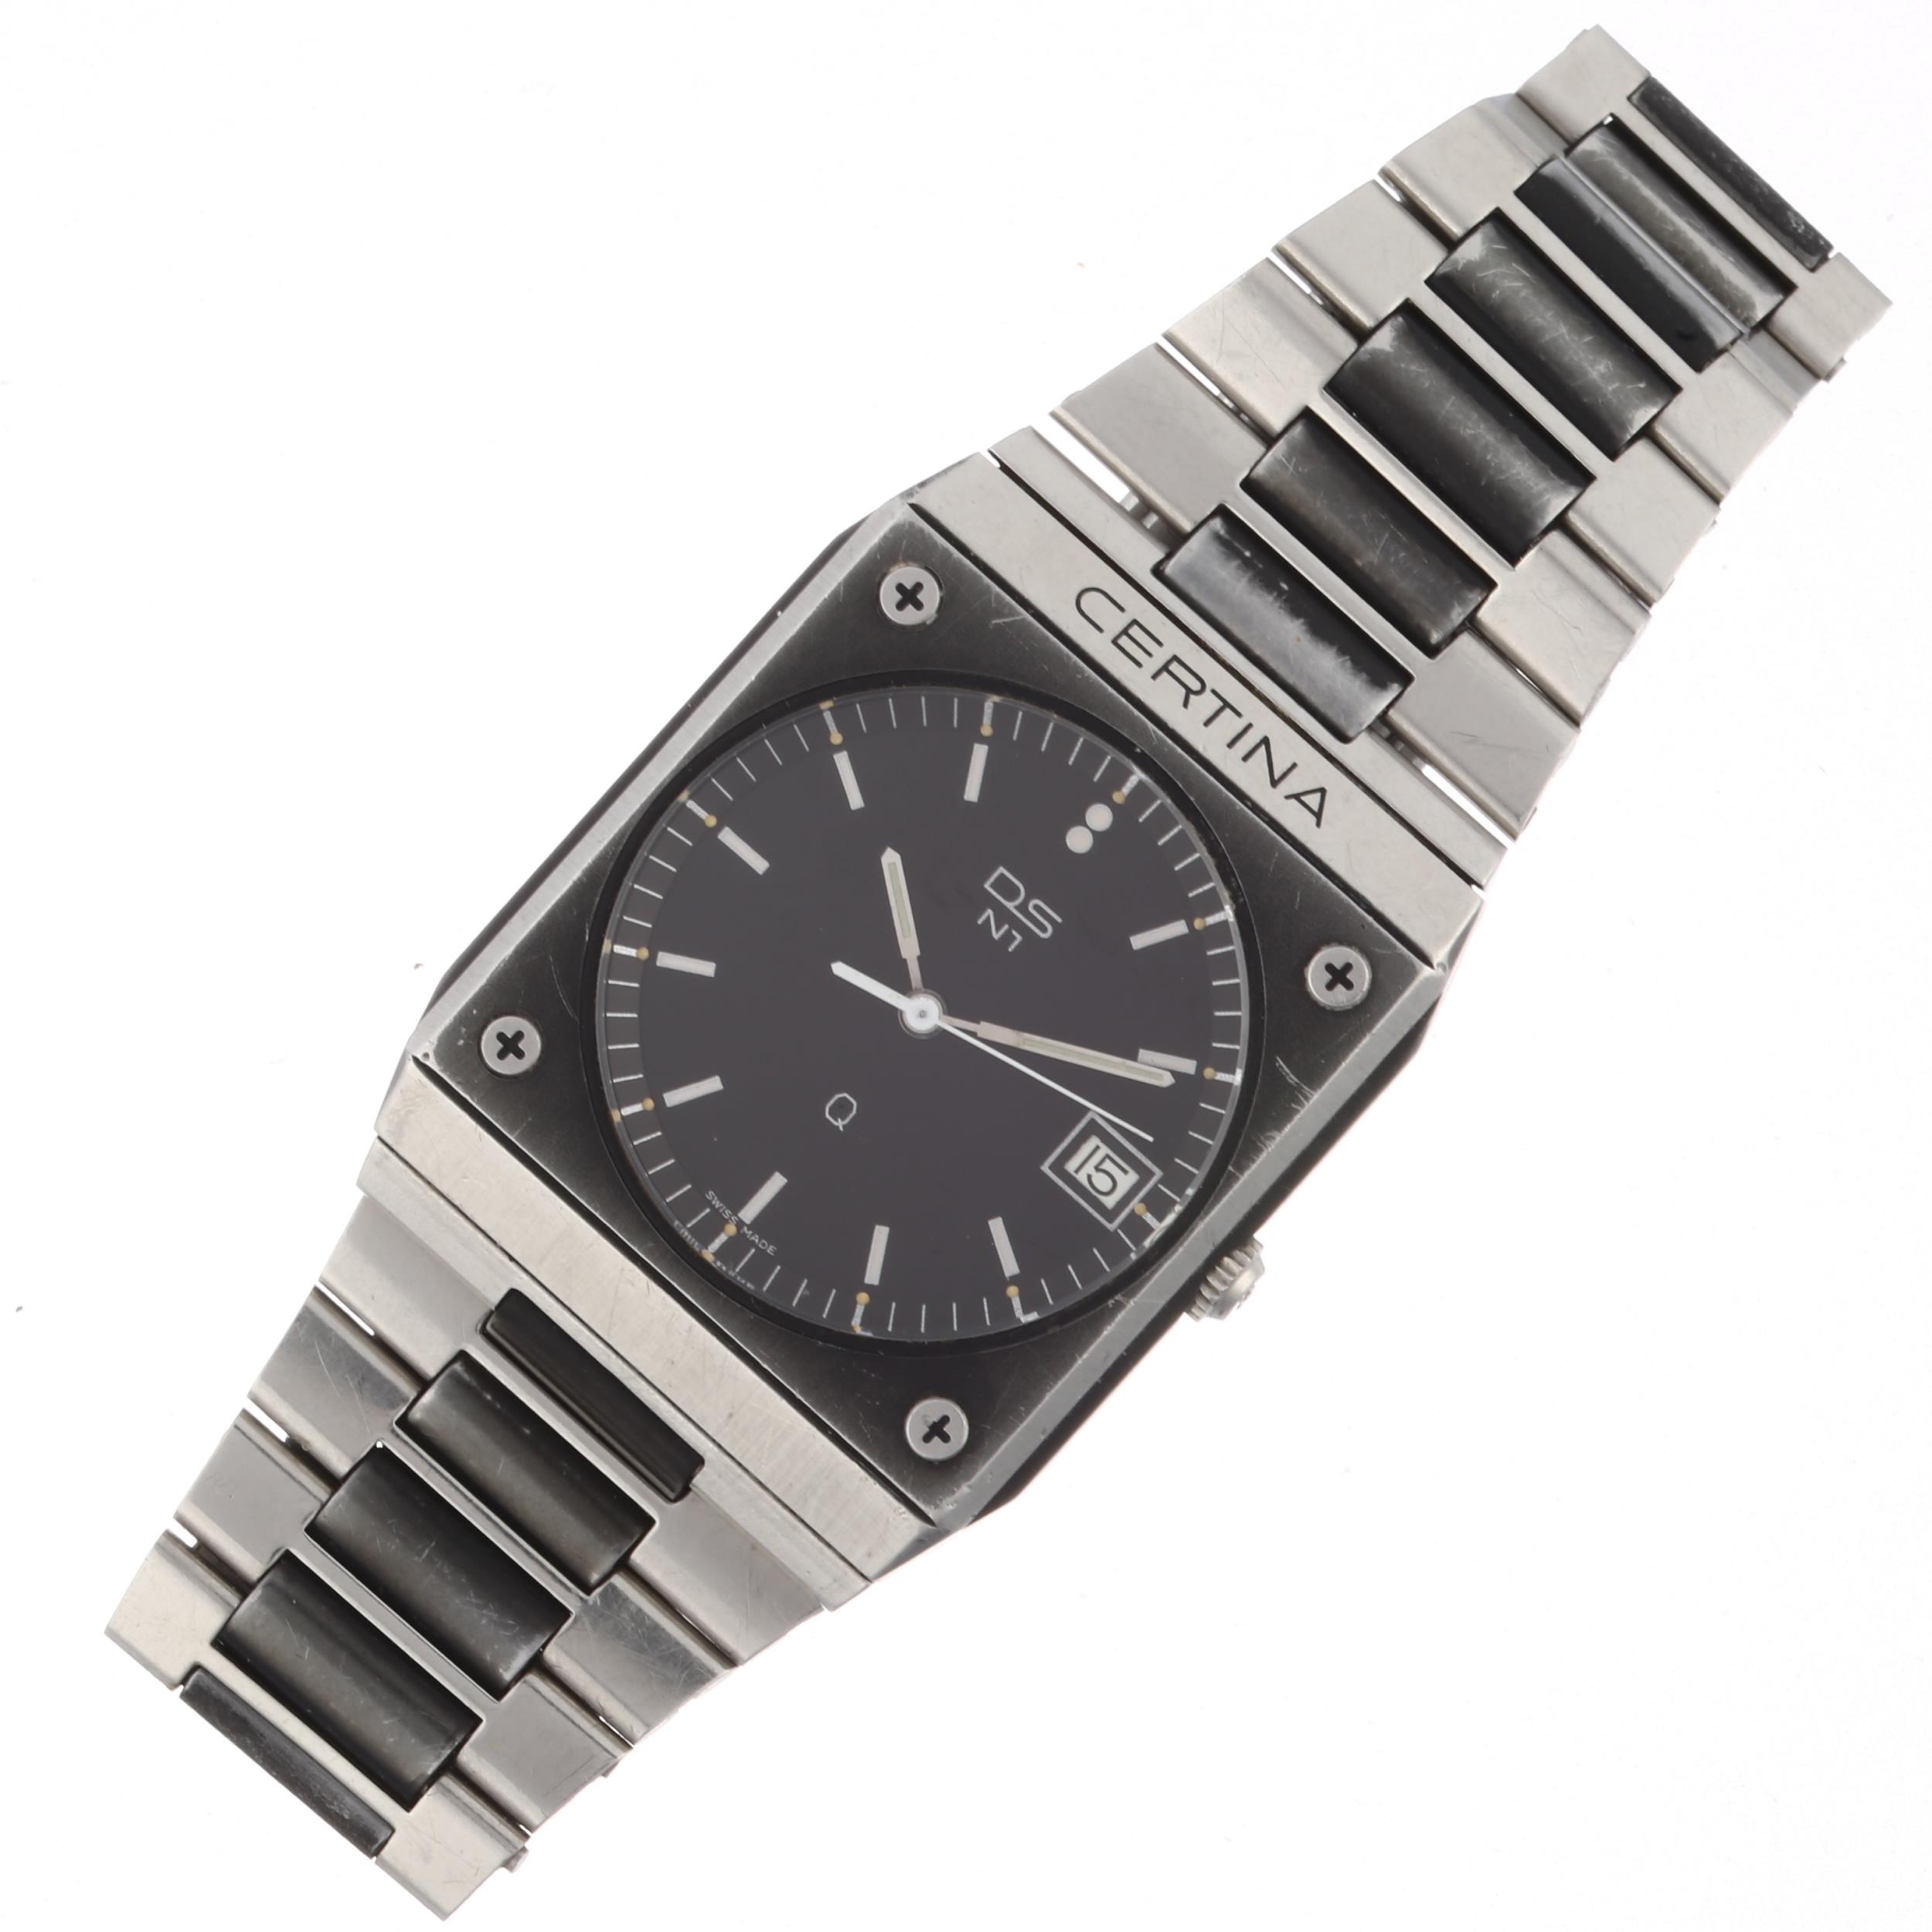 CERTINA - a stainless steel DS-N1 quartz bracelet watch, black dial with baton hour markers, sweep - Image 2 of 5